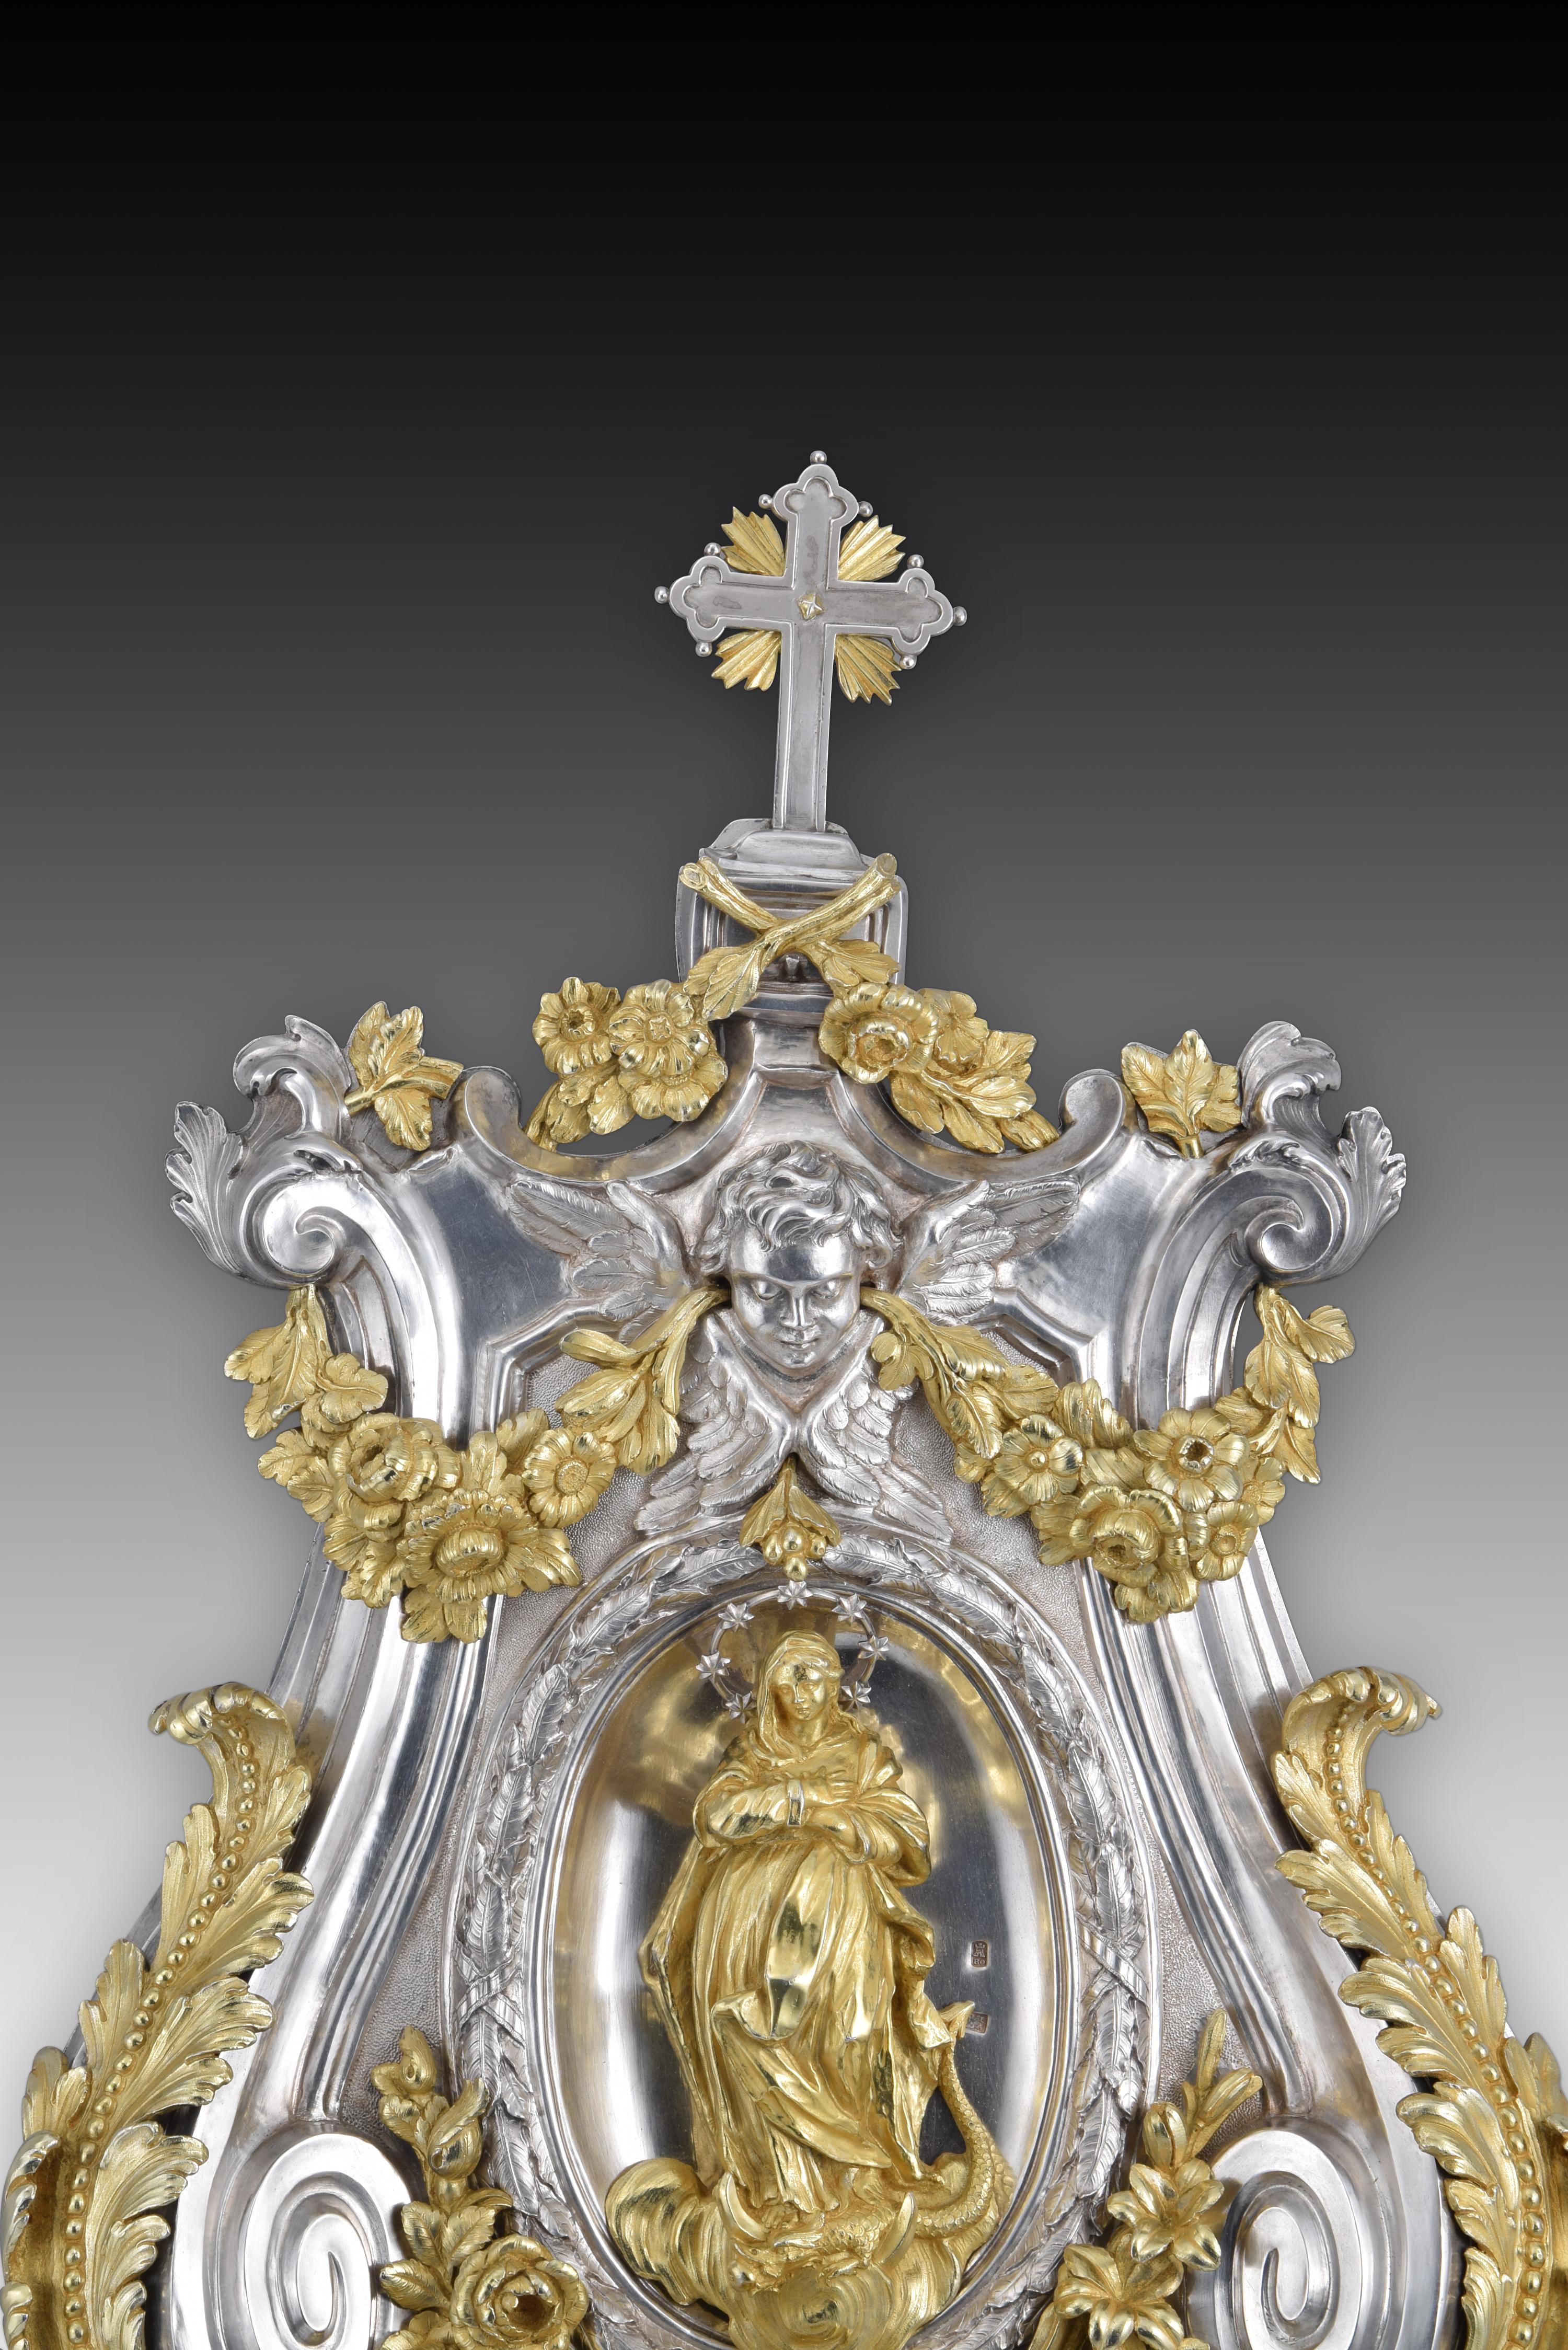 Blessing font. Silver and gilt silver. Miguel Guilla. Madrid, Spain, 1780. 
With contrast marks, buriladas and initials. 
Holy water font to be placed on the wall thanks to a chain on the back, made of silver in its color with decorative elements of